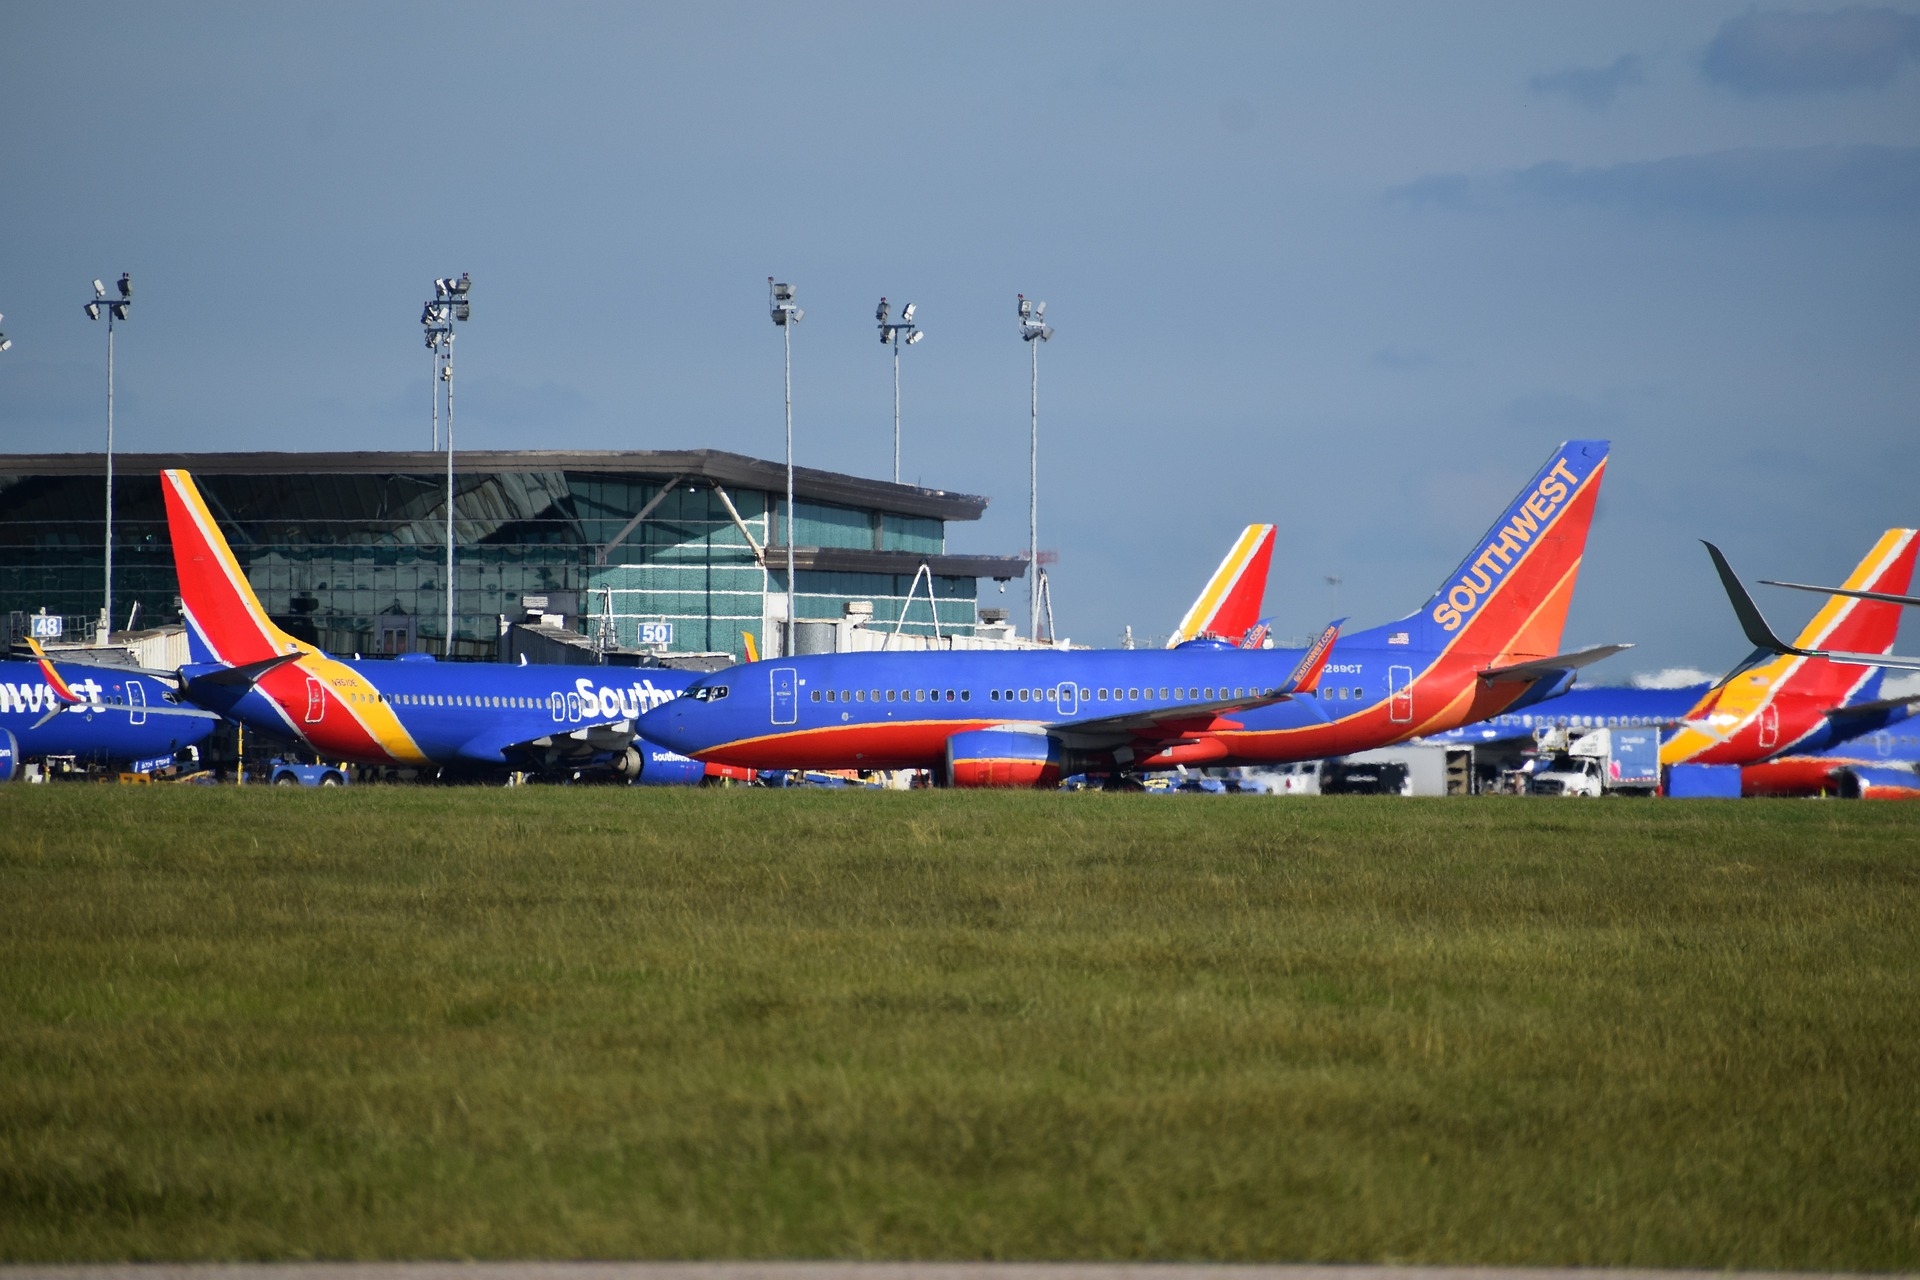 Southwest airline fleet parked by an airport terminal.